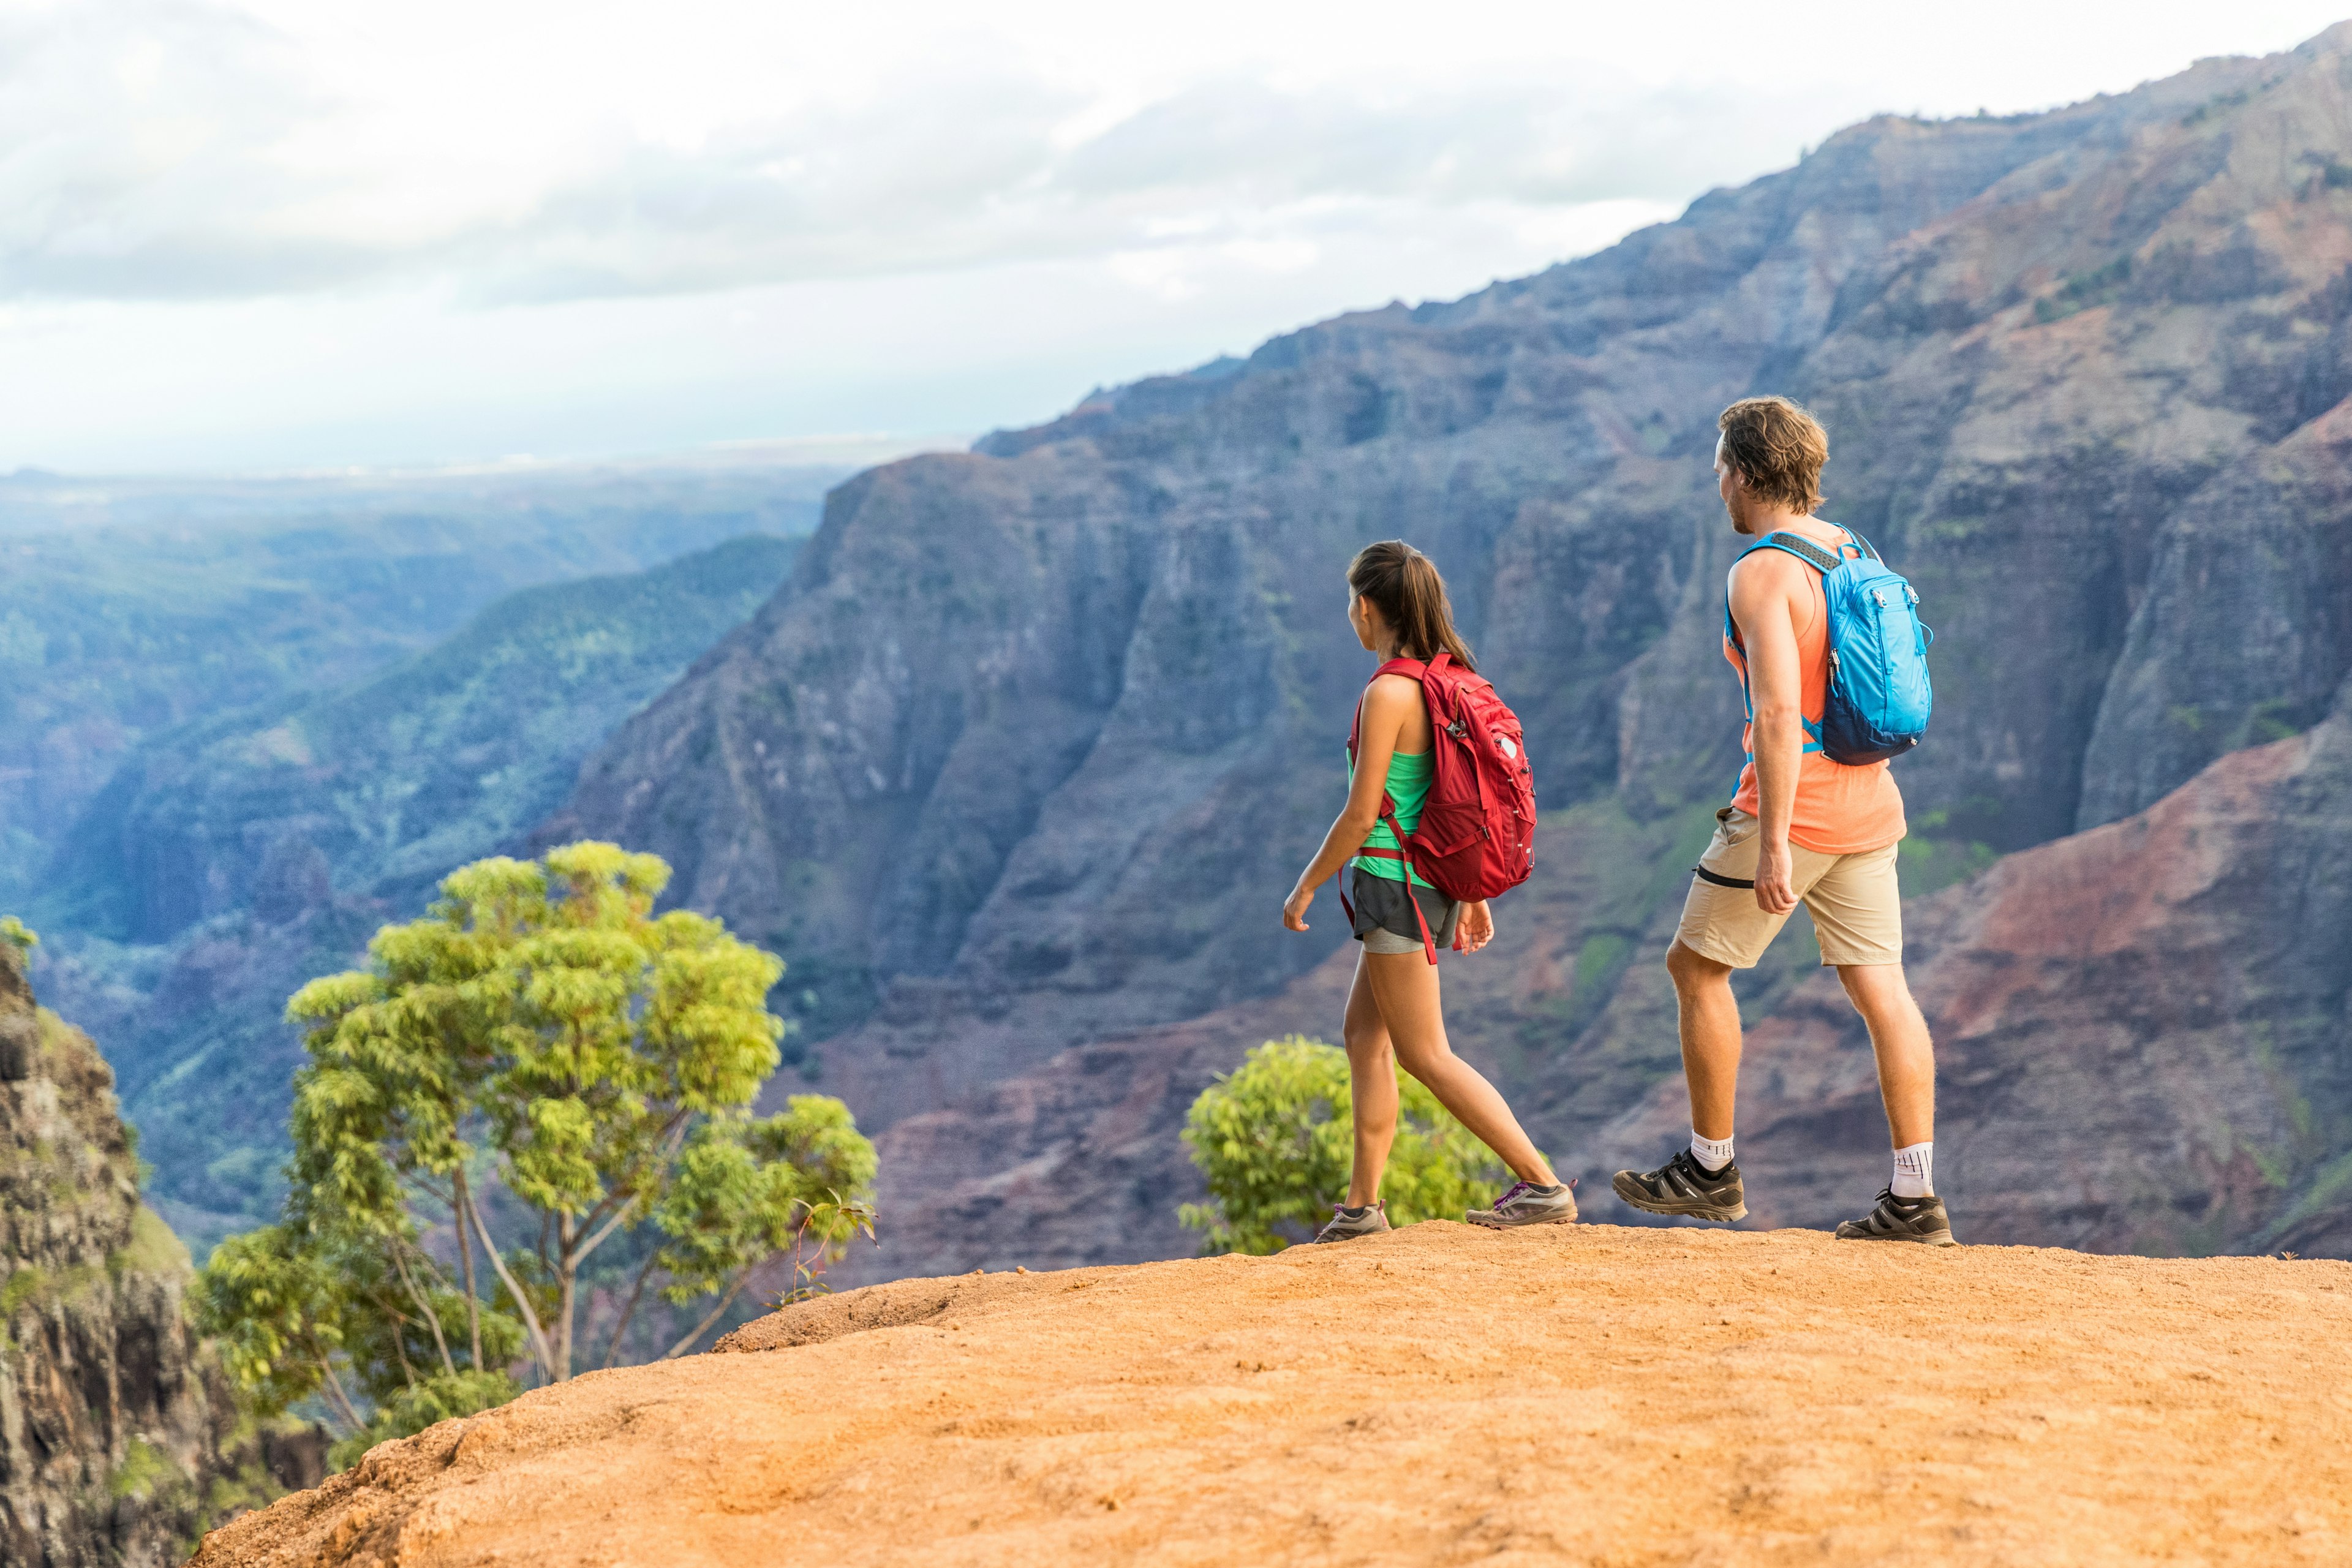 Hikers couple hiking in mountains landscape. Woman and man walking on hike in Waimea Canyon State Park, Kauai, Hawaii, USA. Looking at view happy enjoying healthy outdoor lifestyle.